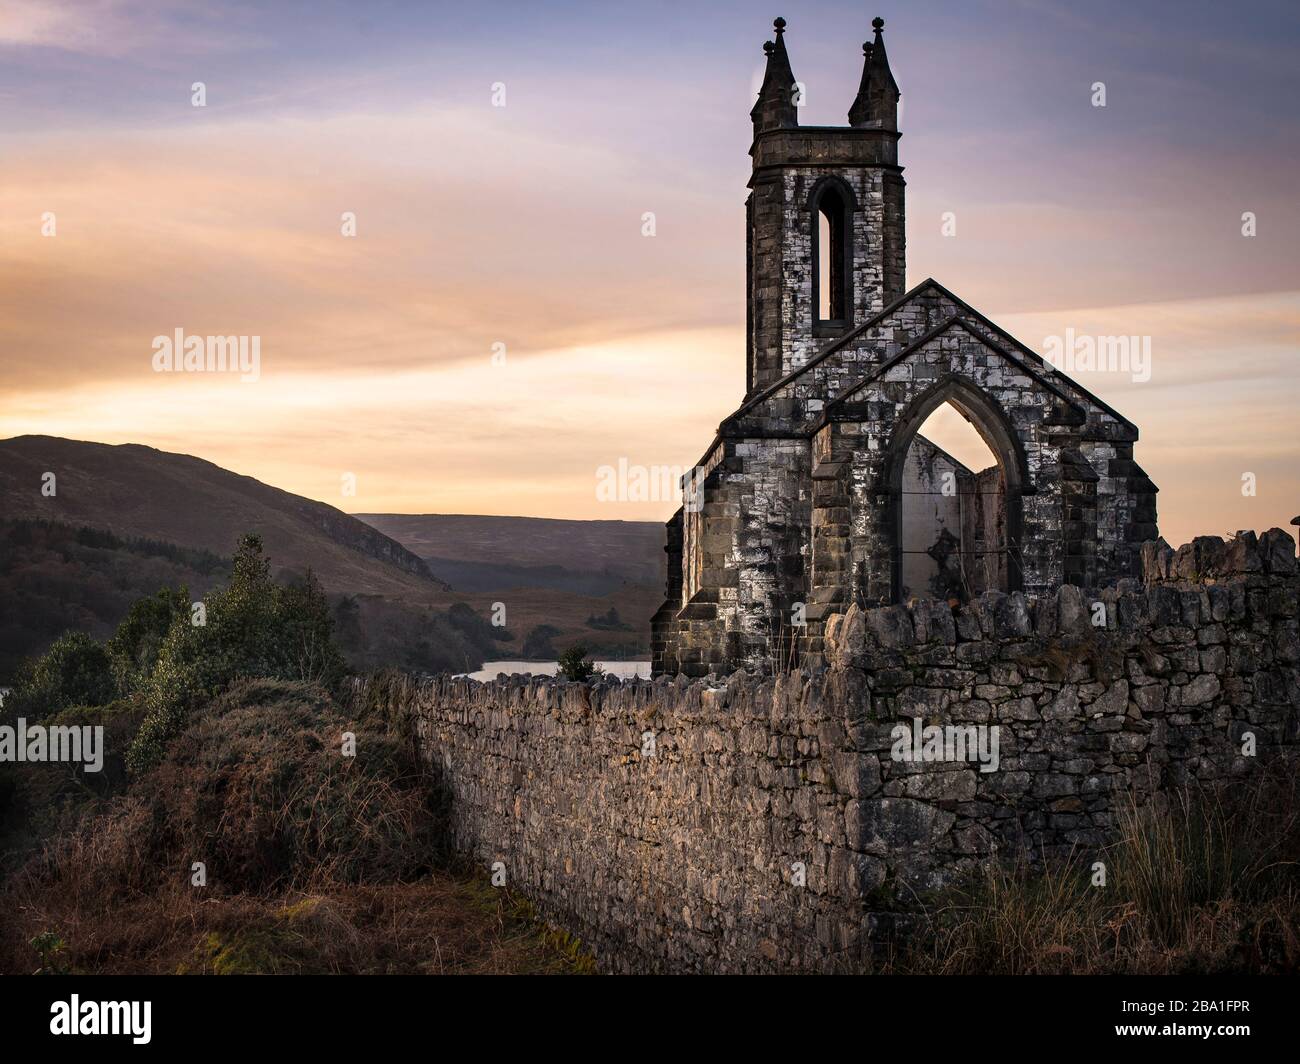 The historic ruins of Dunlewey Church located in west Donegal, Ireland,  An iconic beauty spot famous for its barren landscape and rich history. Stock Photo